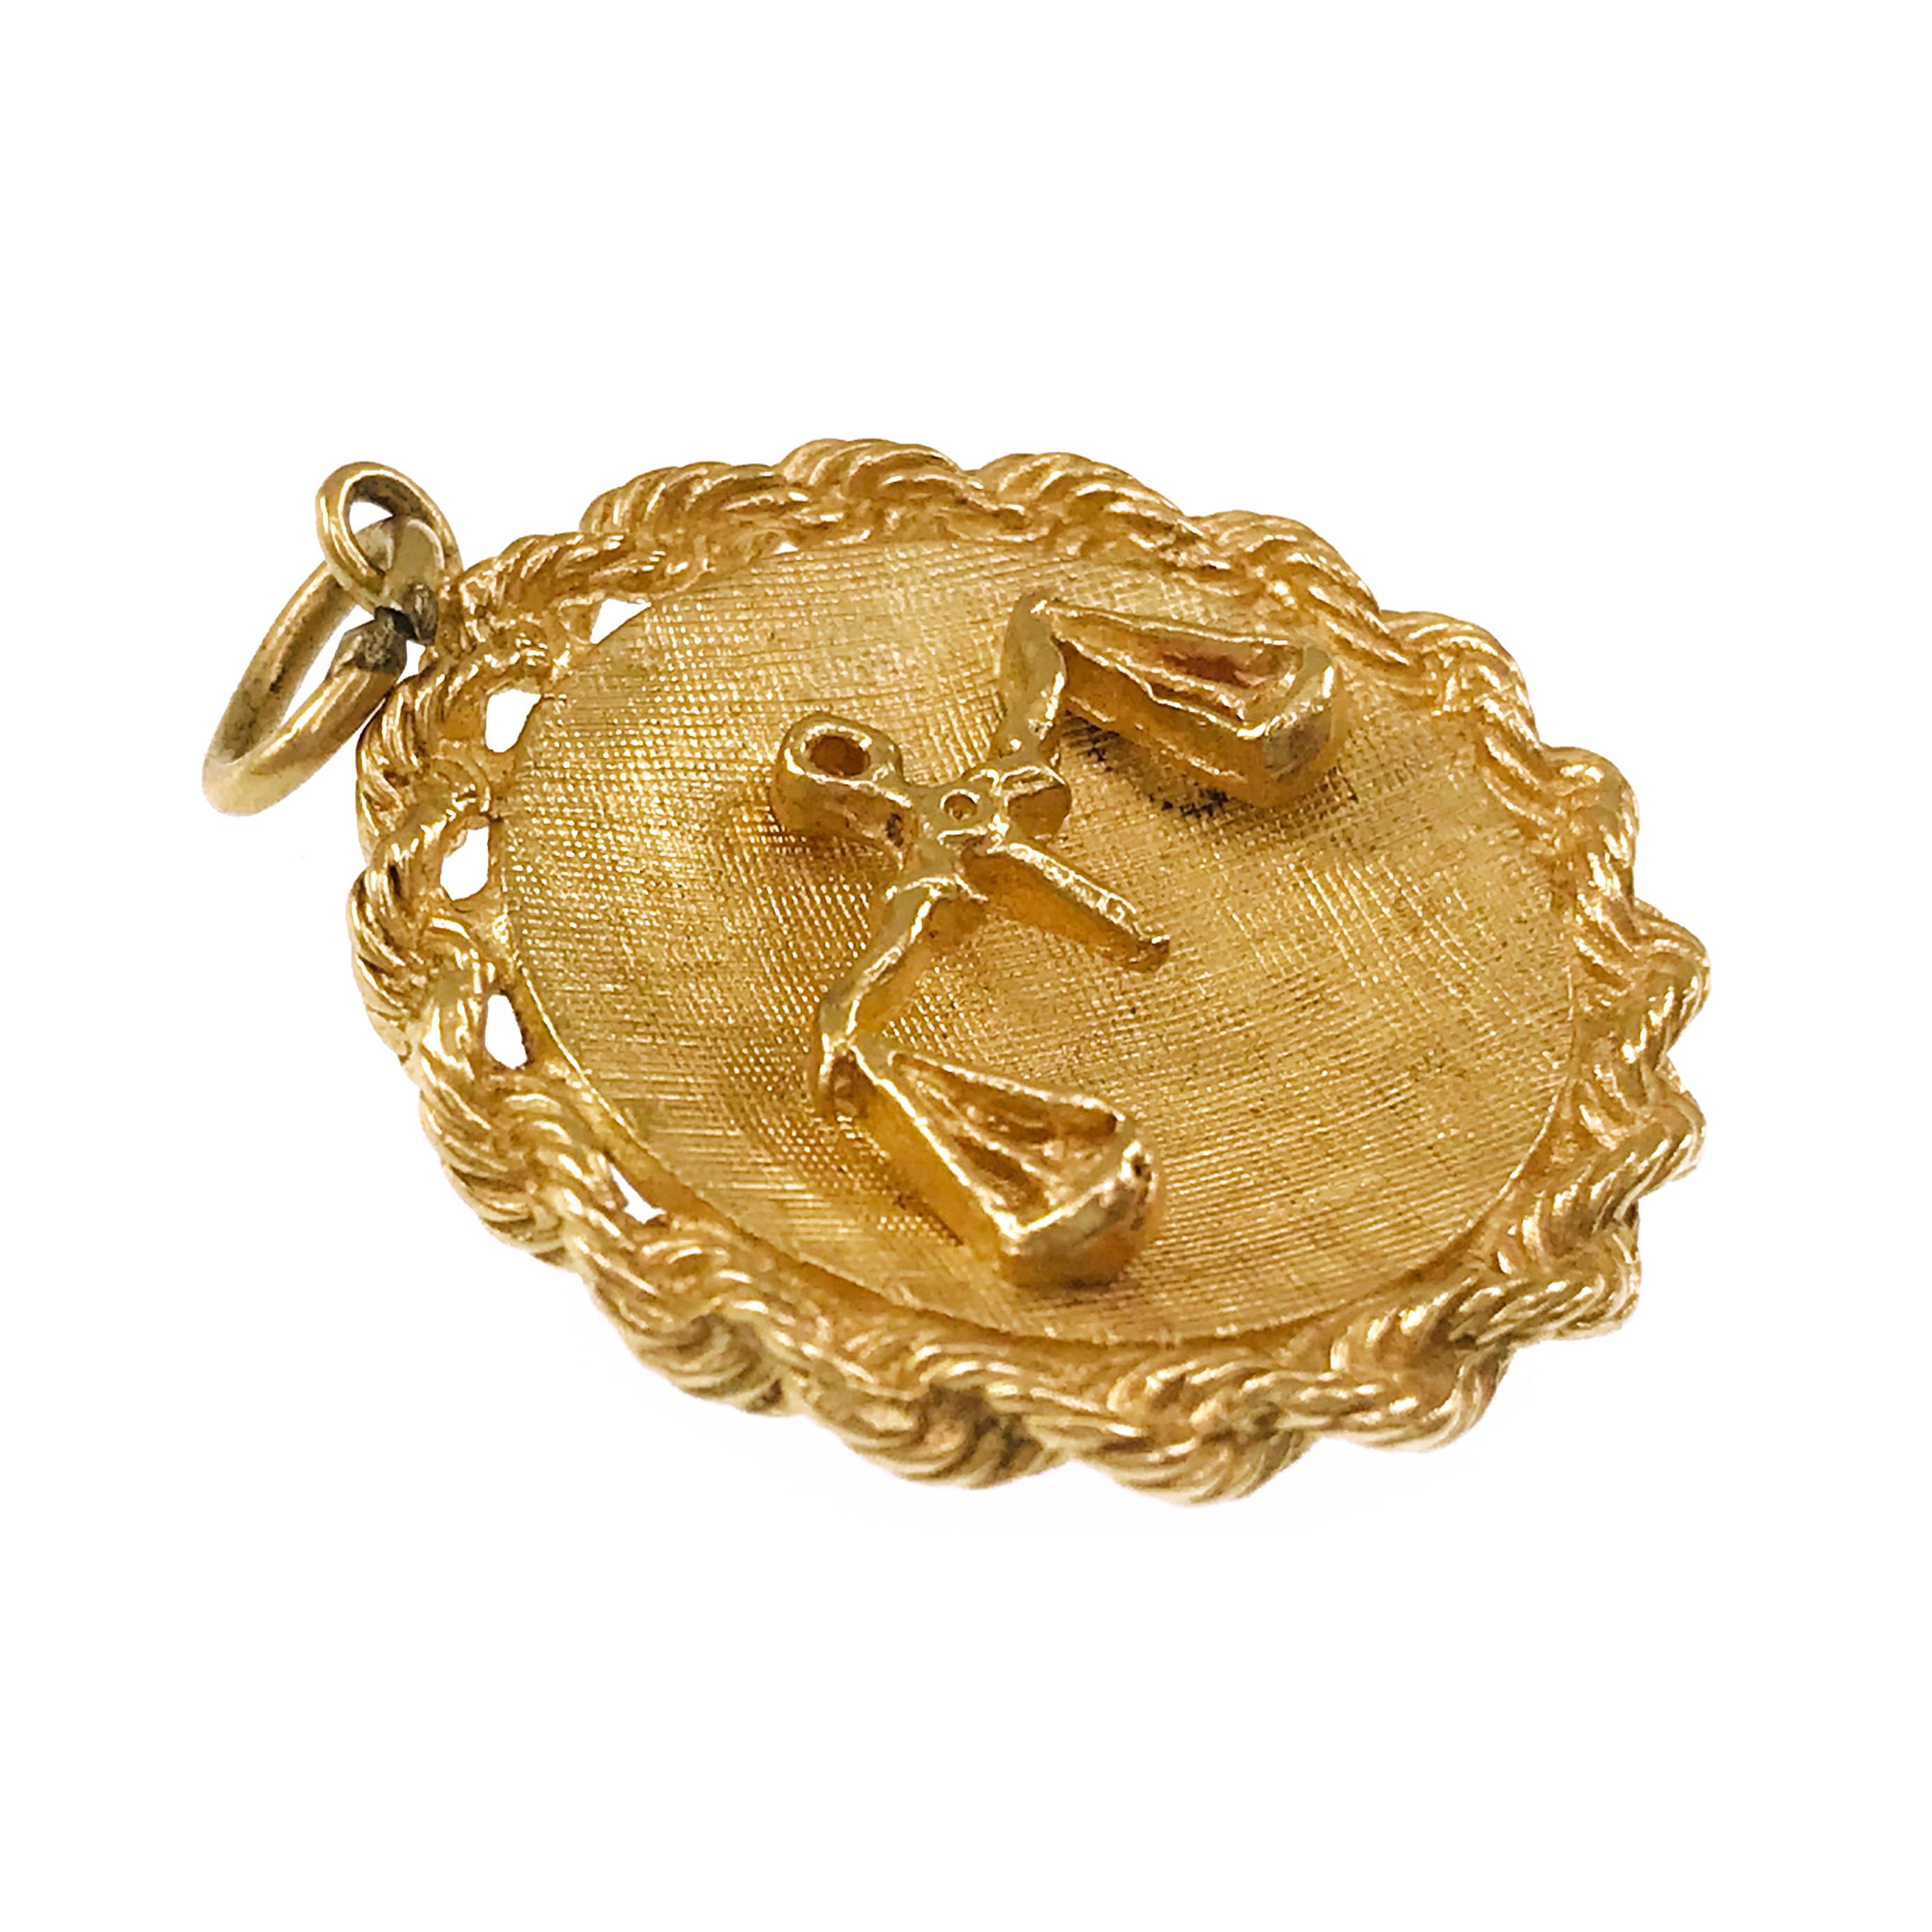 14 Karat Scales of Justice Pendant. Gold rope surrounds the entire outer edge of the pendant. The pendant measures 27.28mm x 3.63mm width. The front and back of the center have a florentine texture with the scales of justice in the center. The total